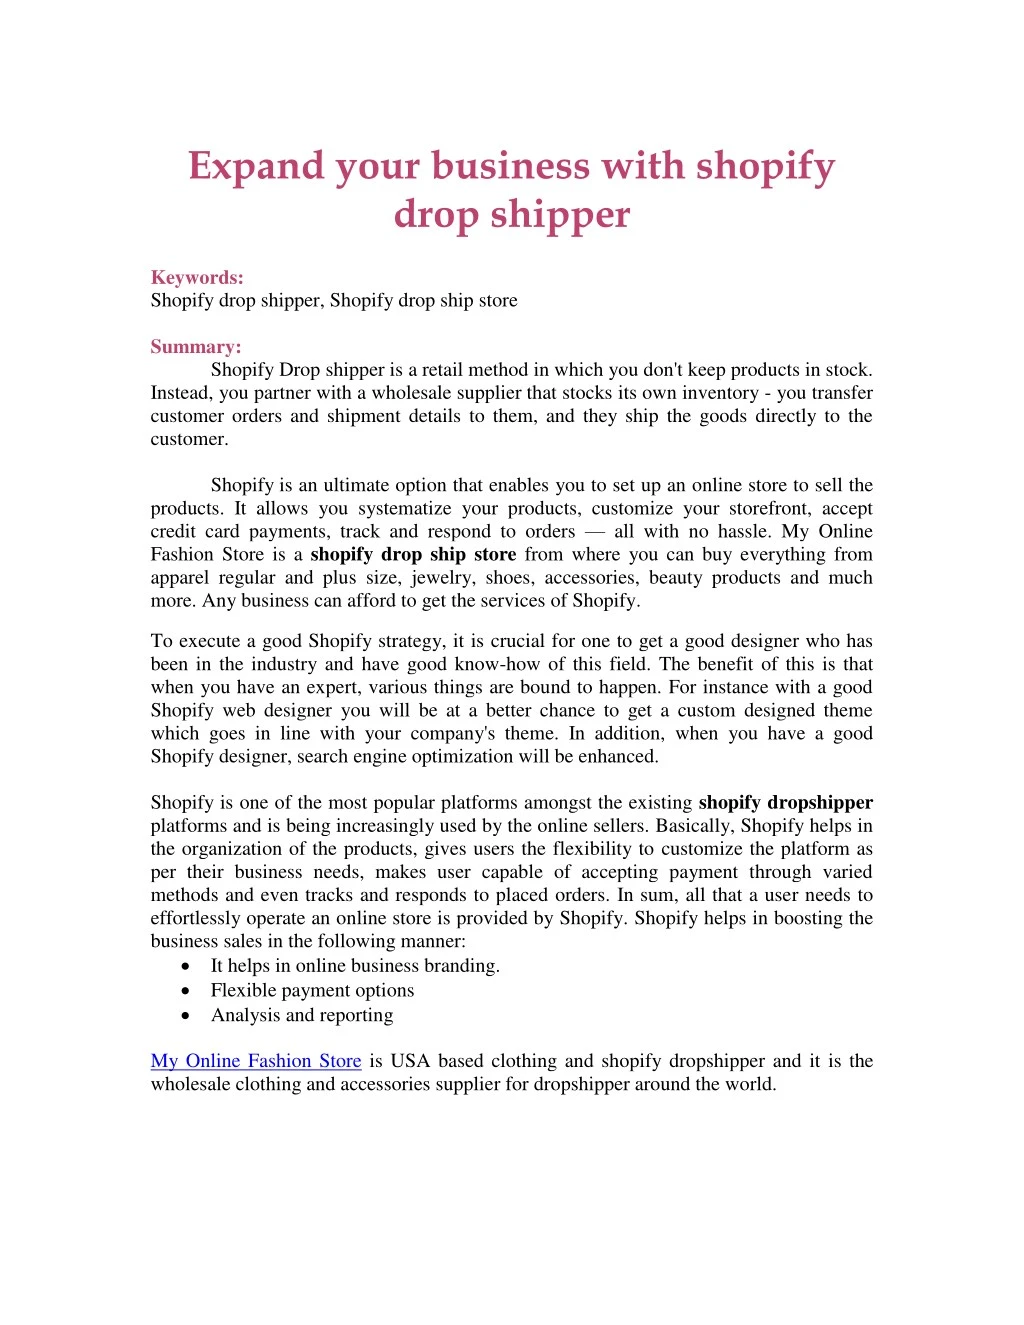 expand your business with shopify drop shipper